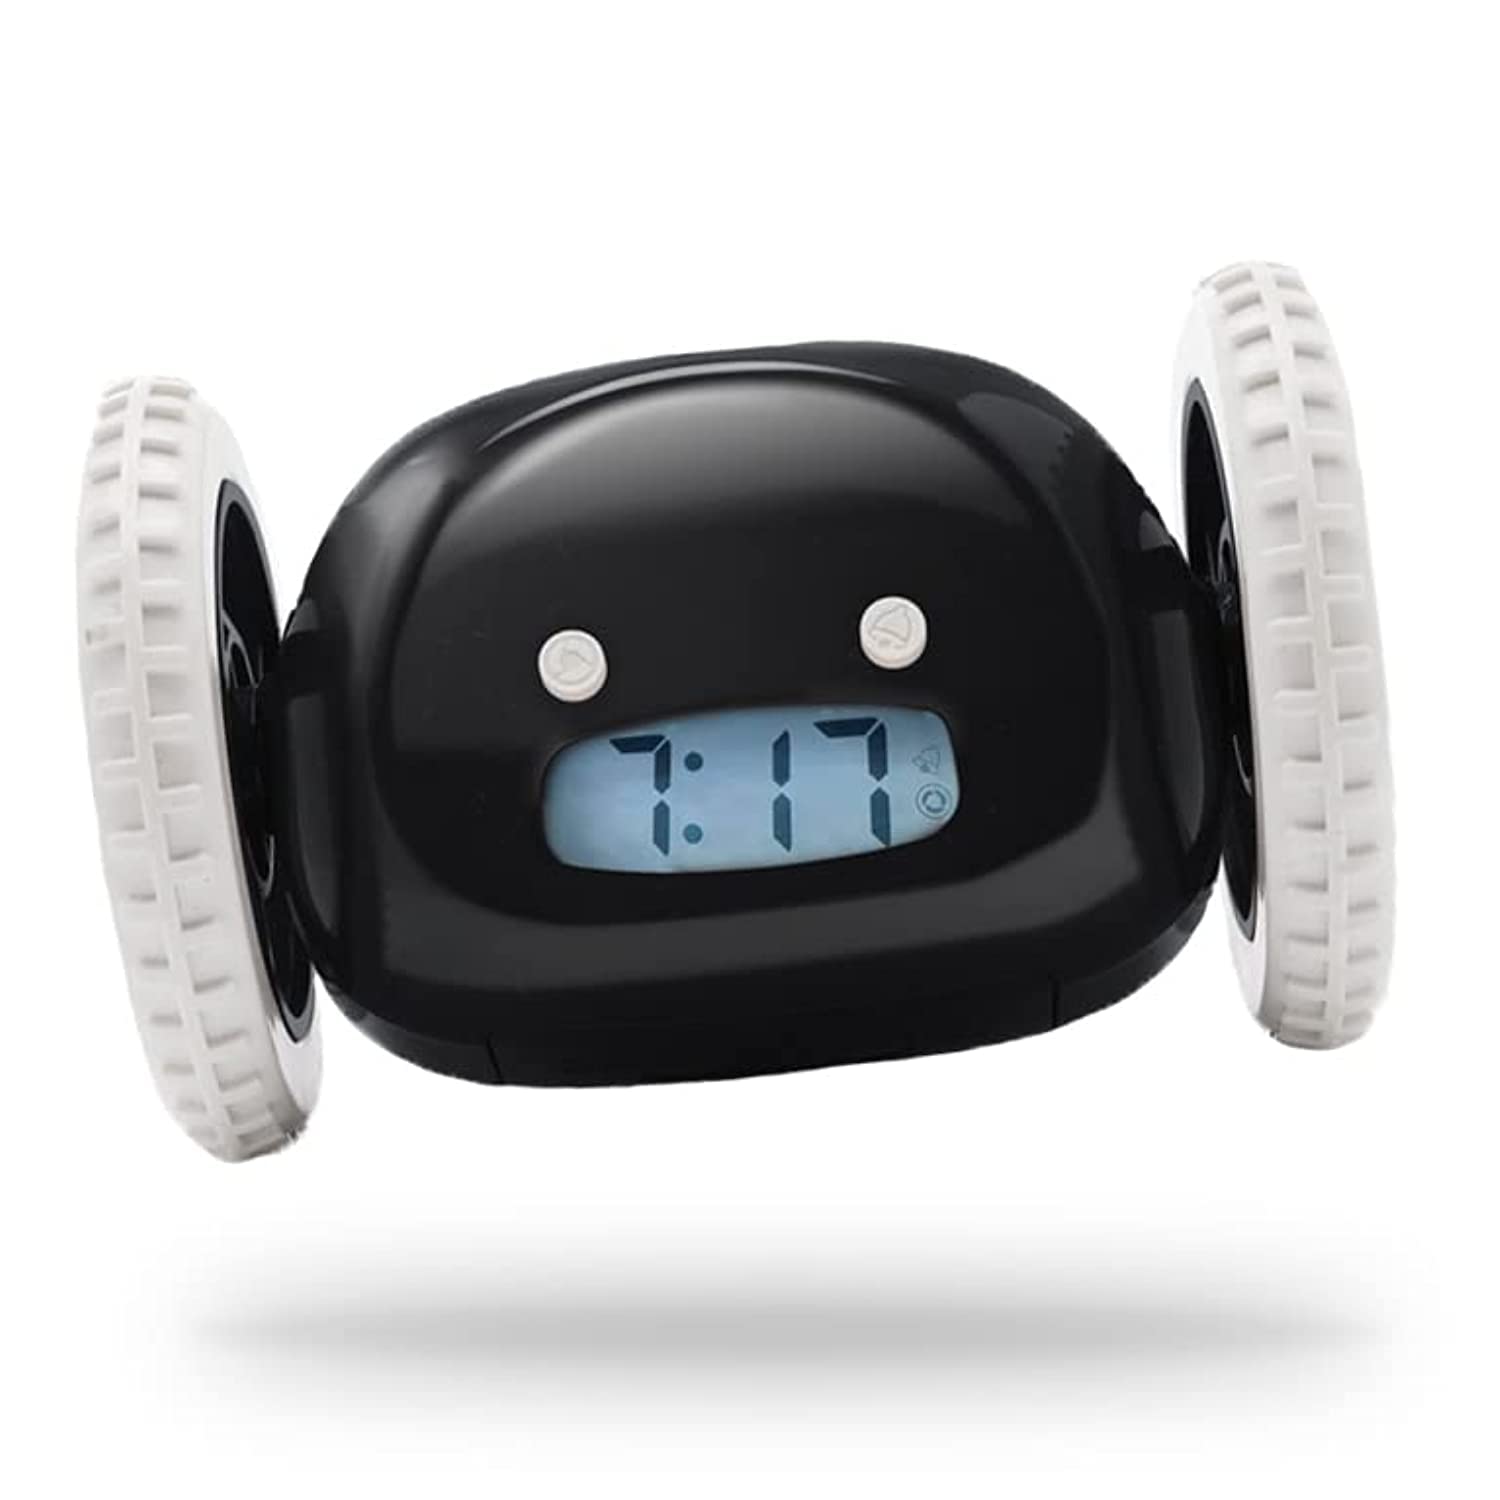 CLOCKY PVC Funny, Rolling, Run-Away, Moving, Jumping Robot Alarm Clock on Wheels (Original) | Extra Loud for Heavy Sleeper, Adult or Kid Bed-Room Multicoloured